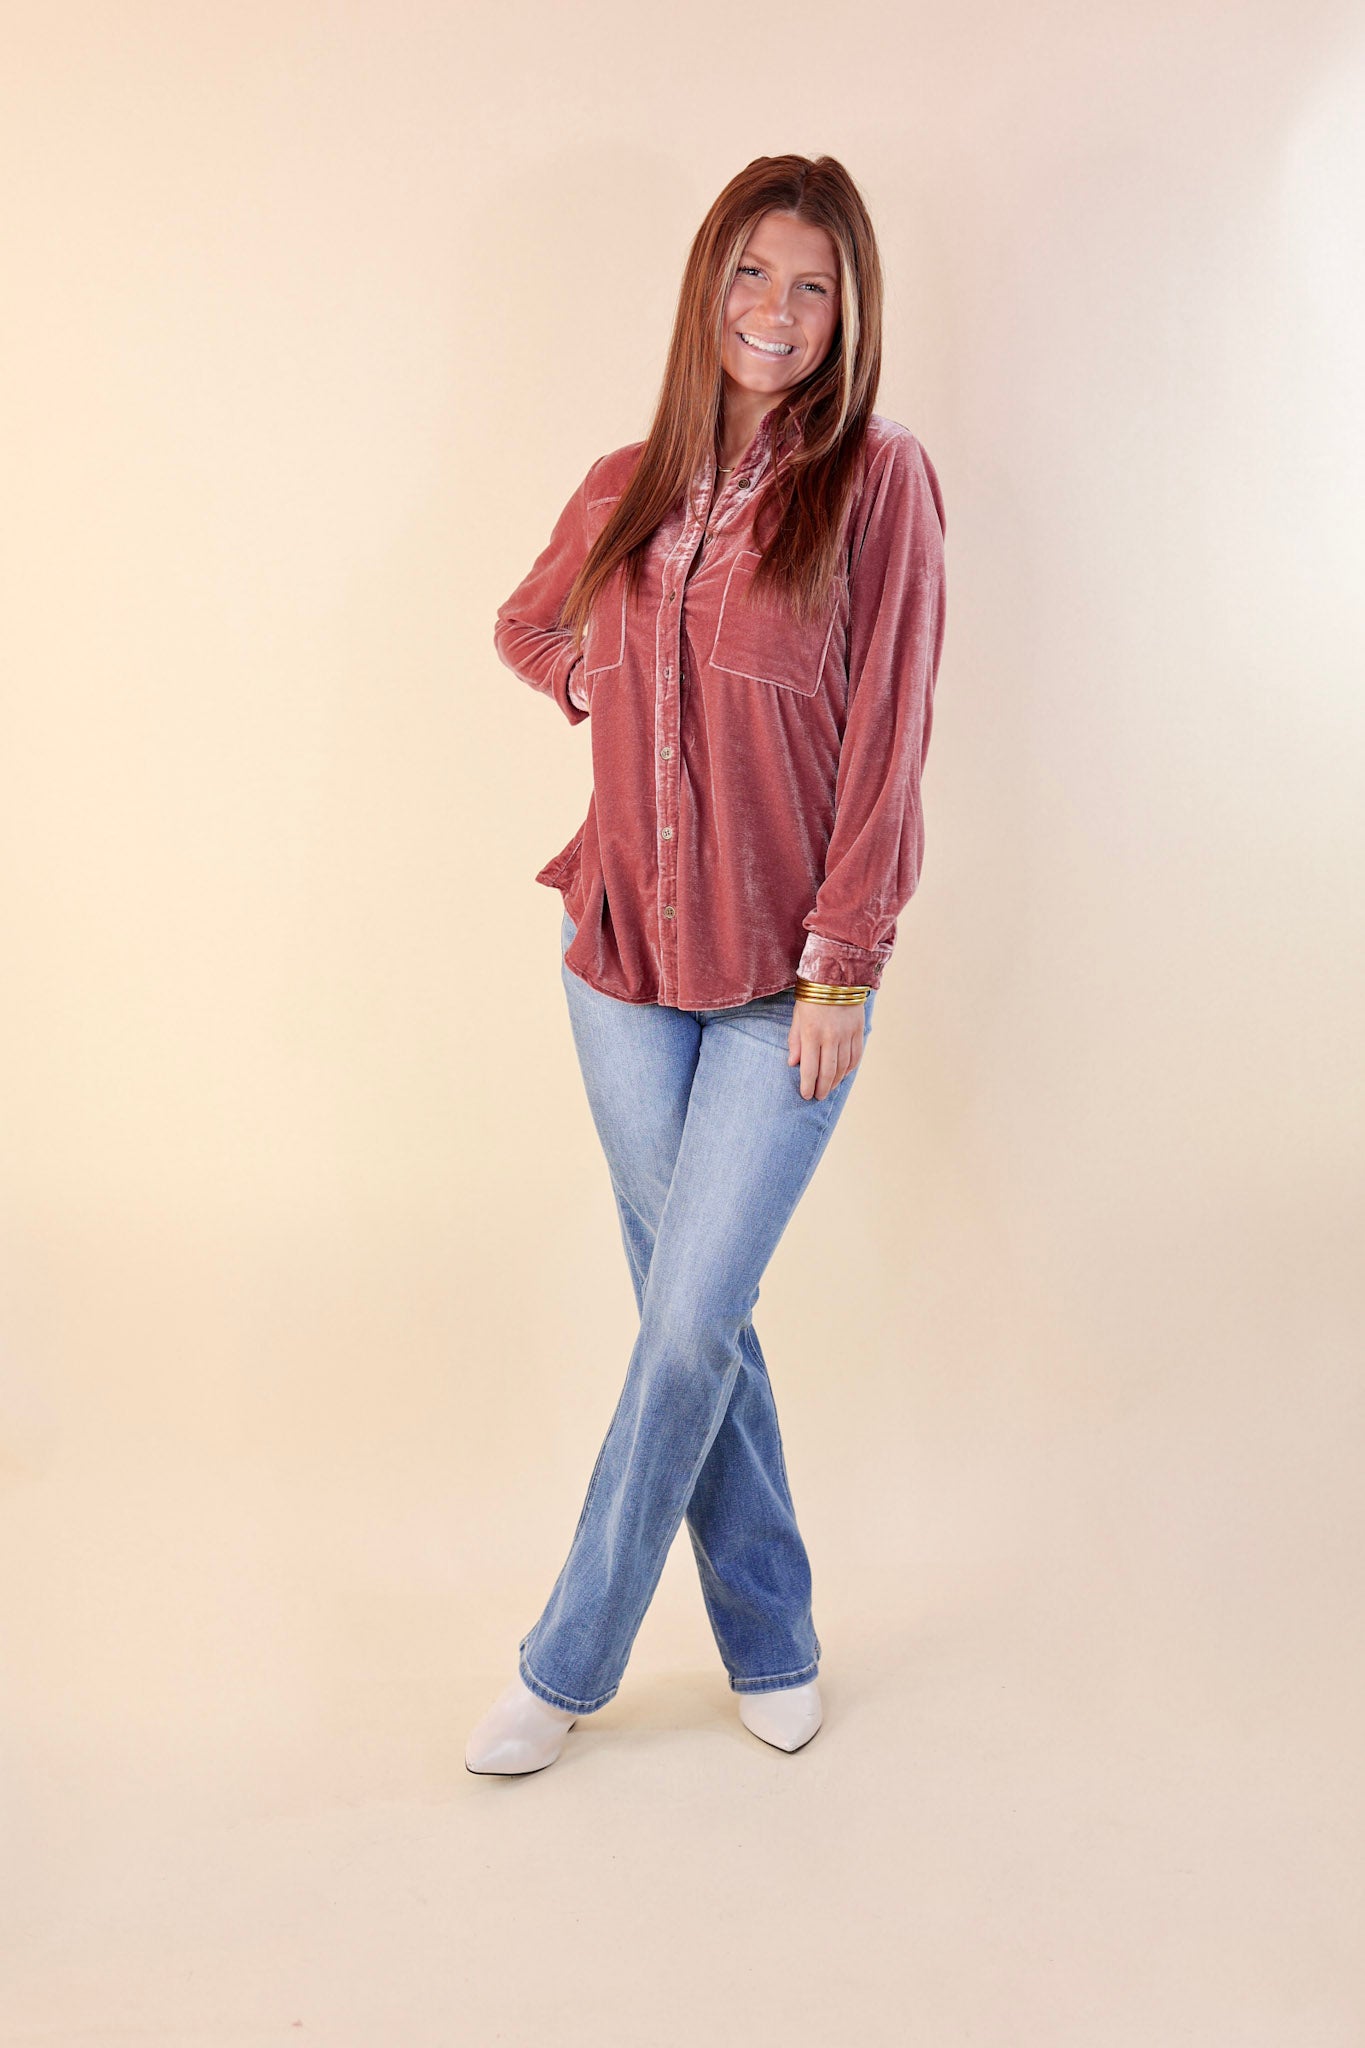 Candy Apple Evening Button Up Velvet Long Sleeve Blouse in Rose Quartz Pink - Giddy Up Glamour Boutique